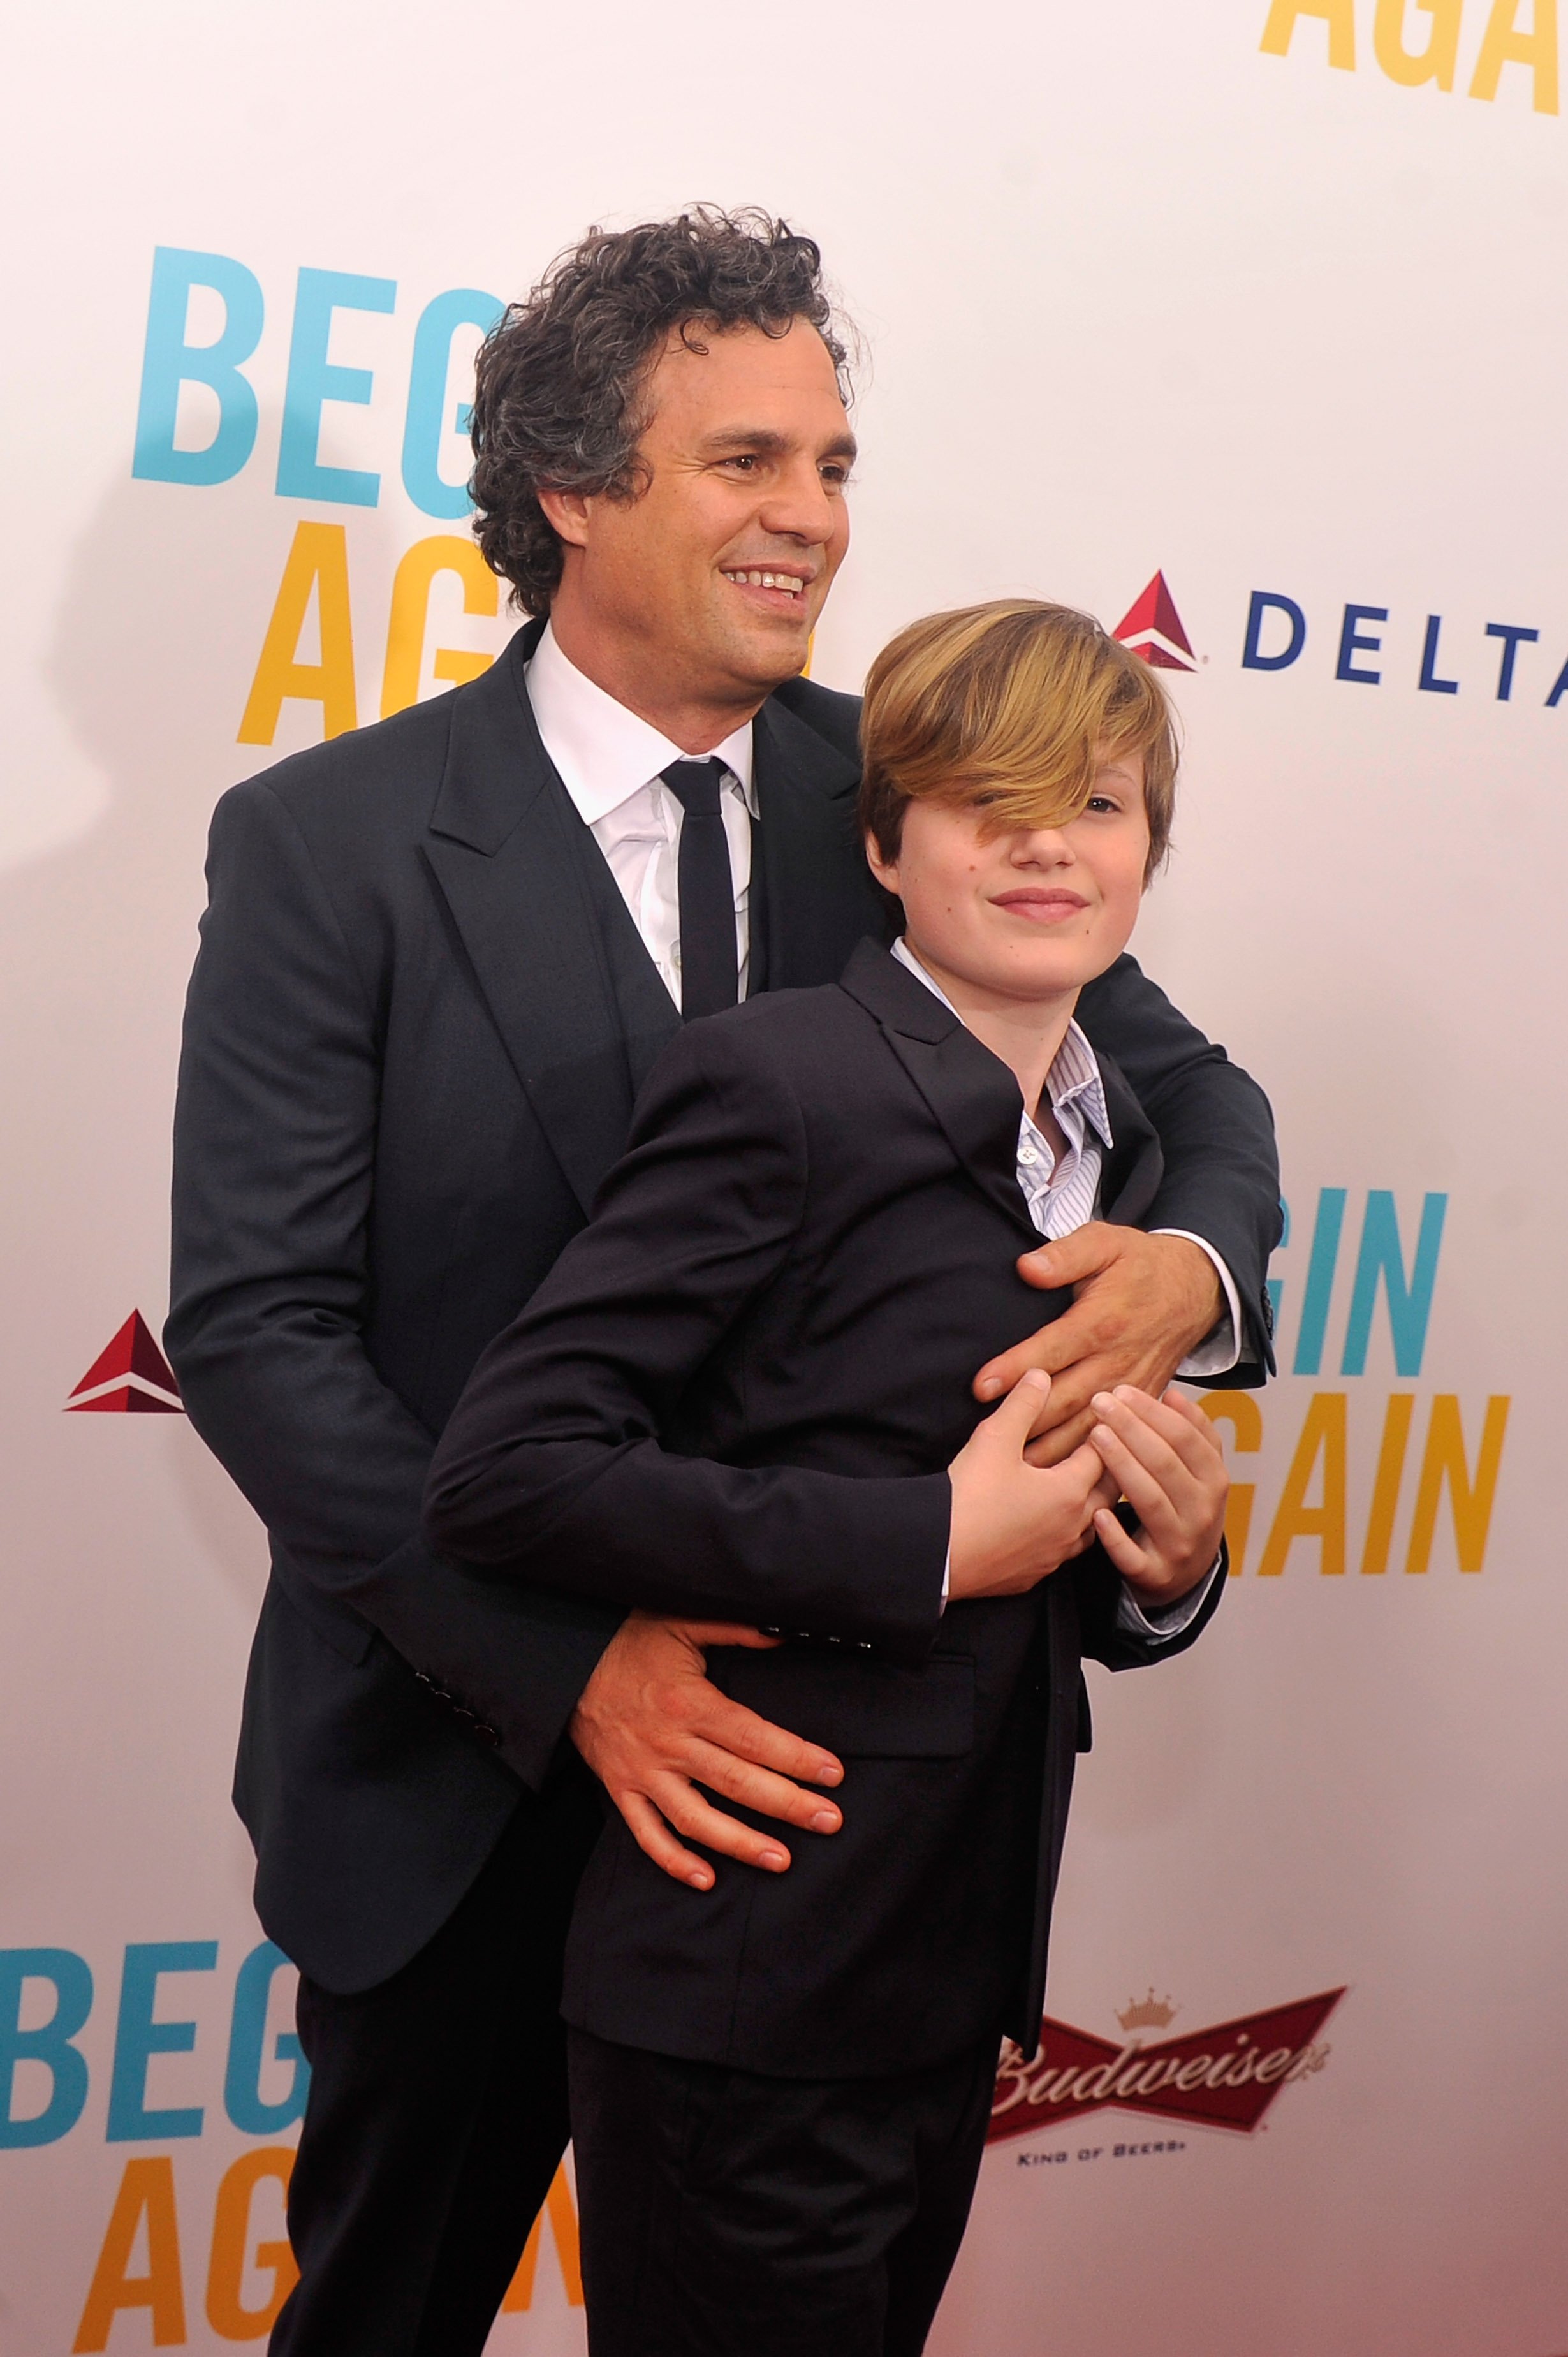 Actor Mark Ruffalo and son Keen Ruffalo at the New York premiere of the Weinstein company's BEGIN AGAIN, sponsored by Delta Airlines and Budweiser at SVA Theater on June 25, 2014 in New York City. | Source: Getty Images